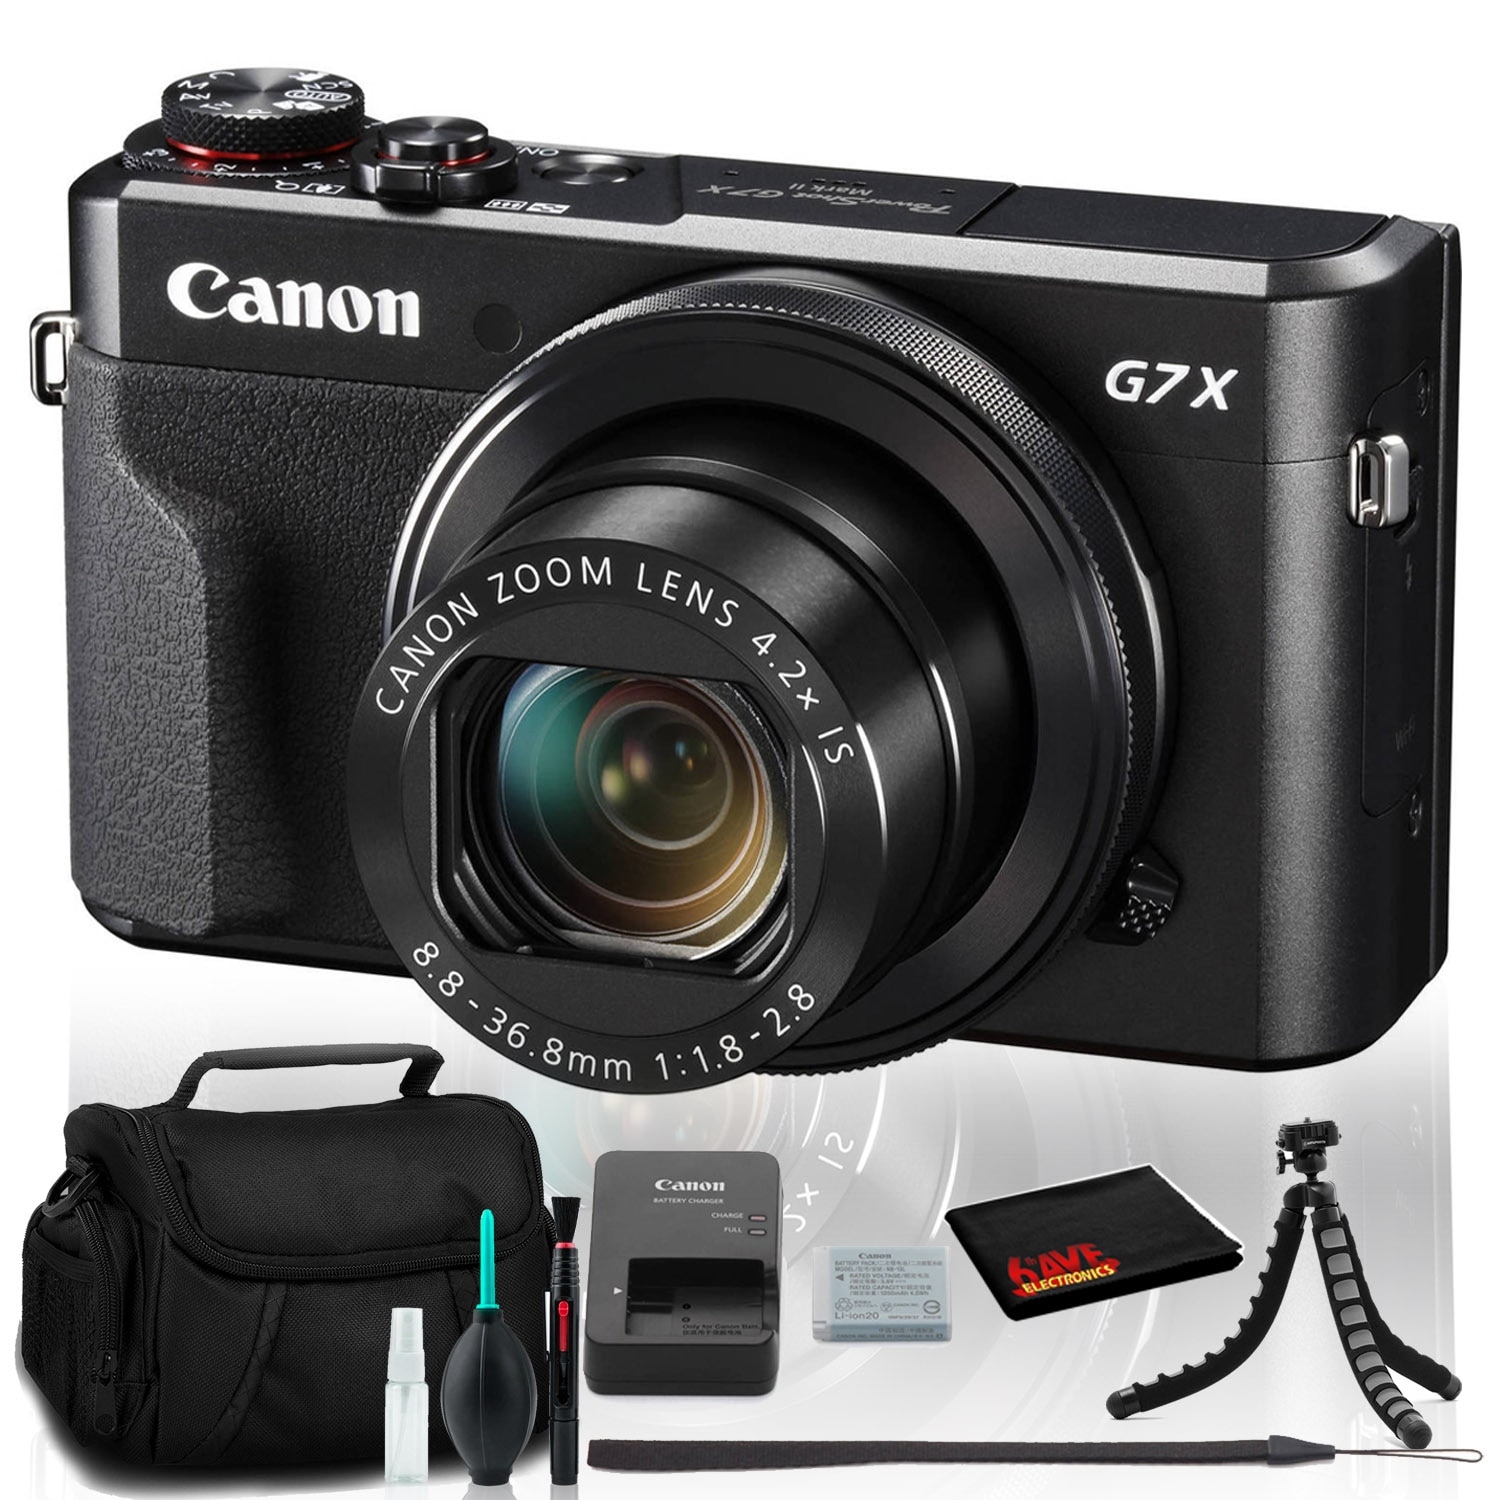 Canon Powershot G7 X Mark Ii Digital Camera Intl Model With Case And Overstock